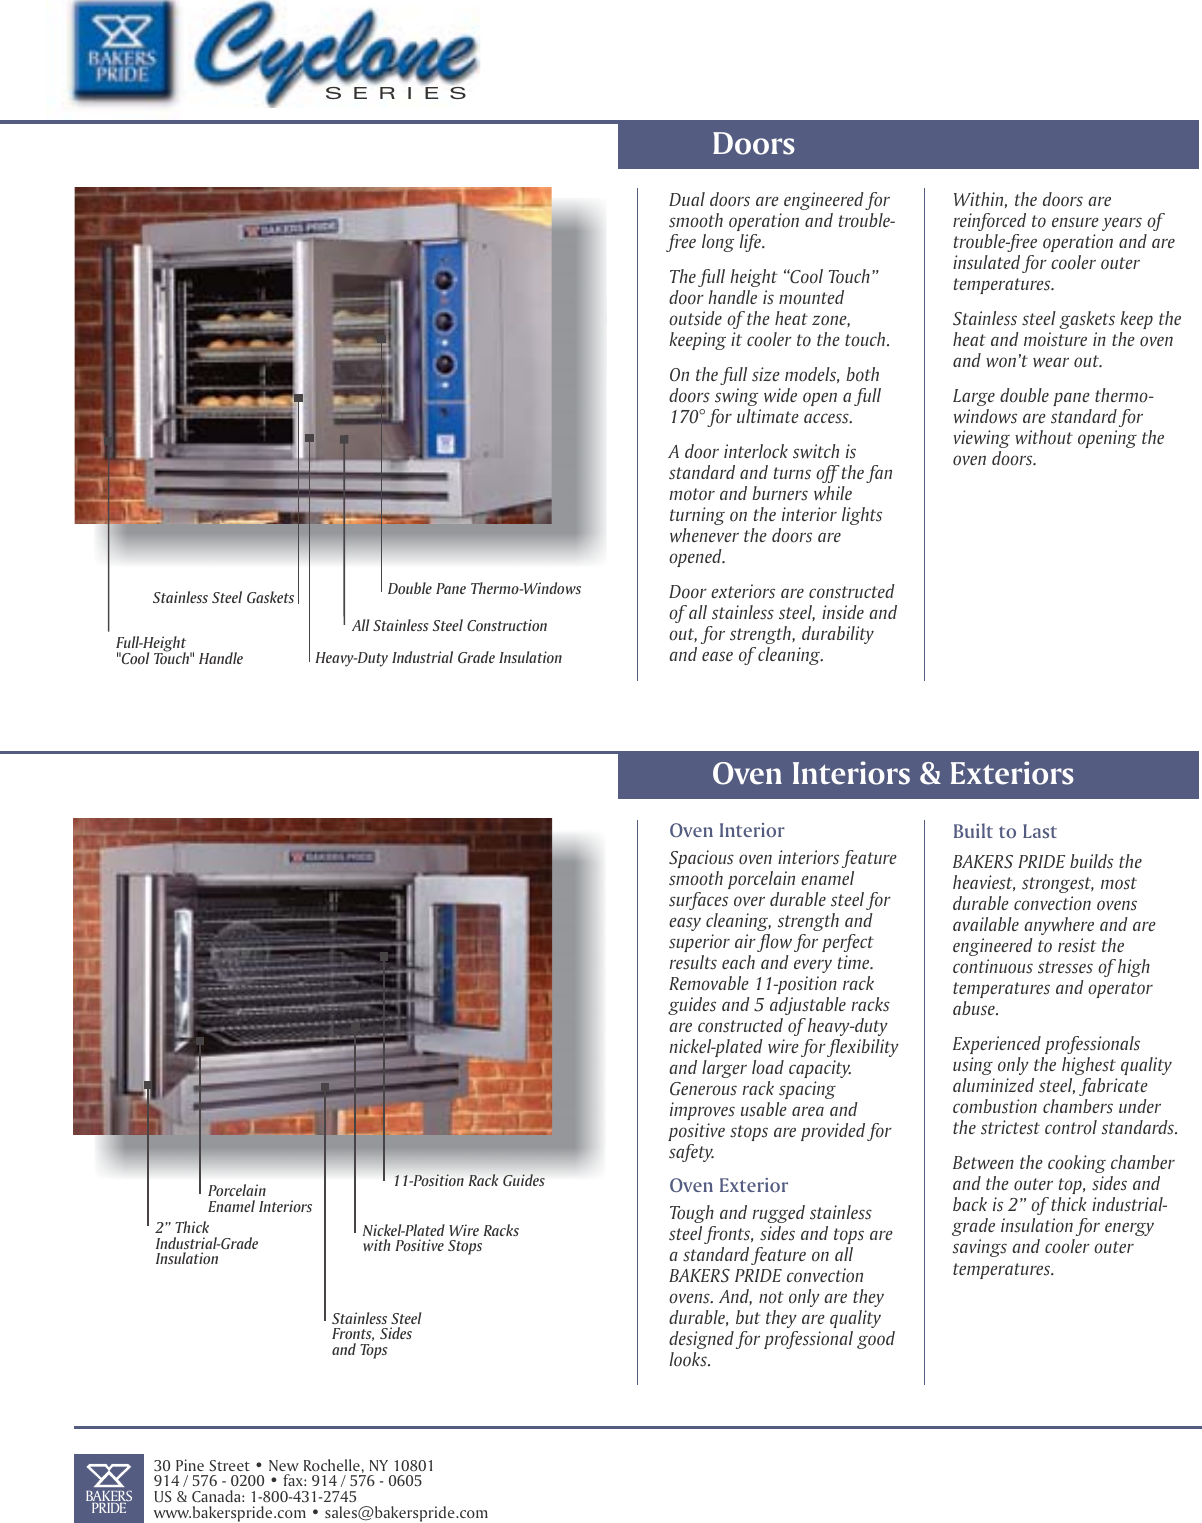 Page 6 of 8 - Bakers-Pride-Oven Bakers-Pride-Oven-Co11-Users-Manual- Cyclone Brochure 2006  Bakers-pride-oven-co11-users-manual